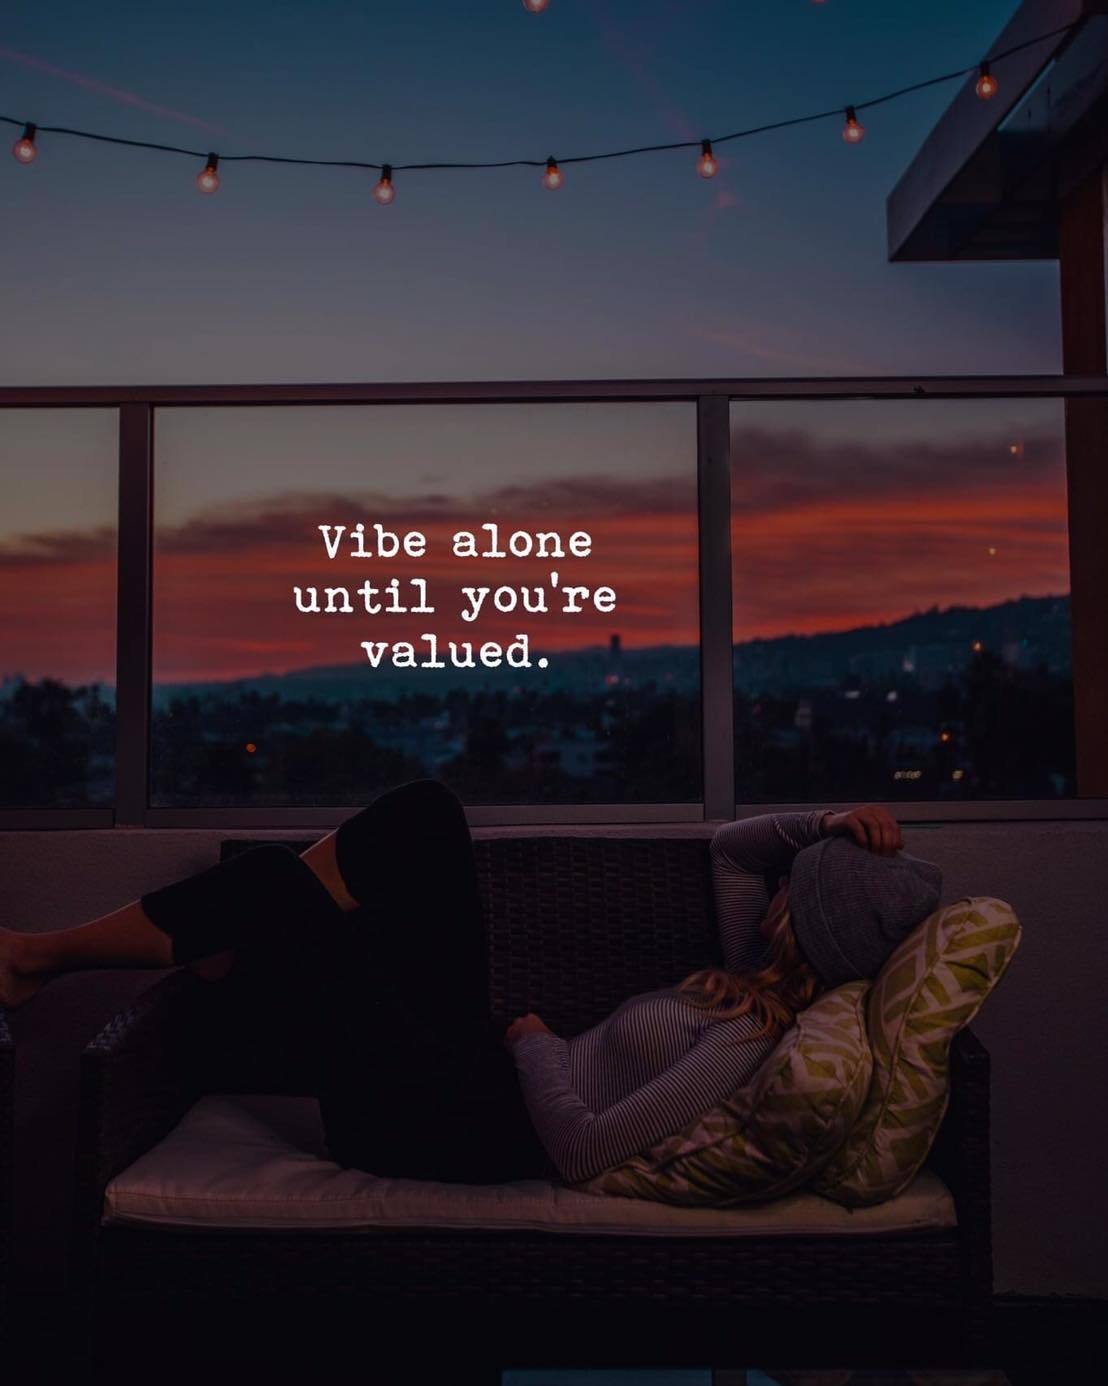 Quotes 'nd Notes - Vibe alone until you're valued.